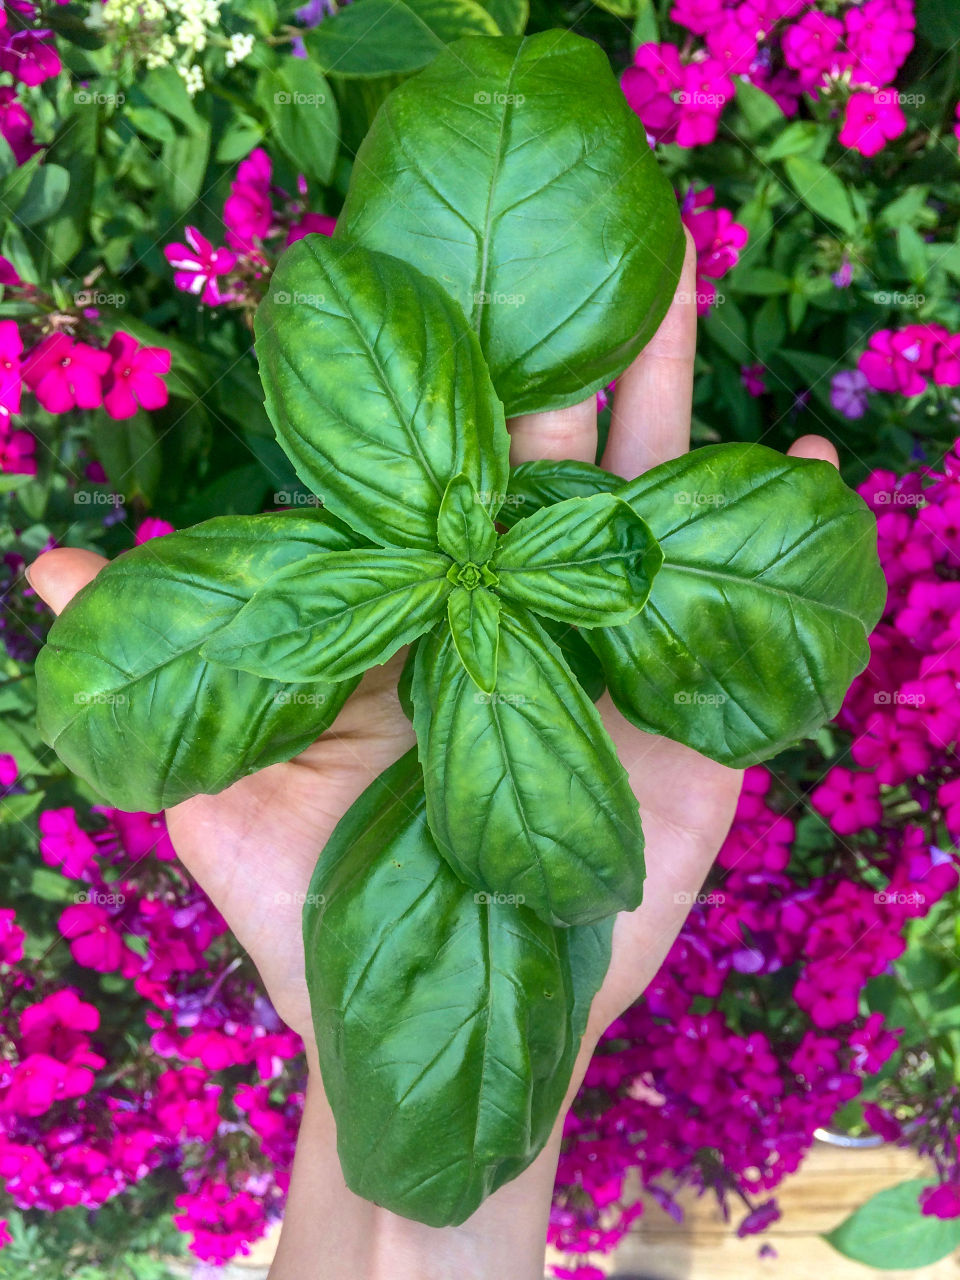 Holding a bunch of massive Italian basil leaves above a vibrant backsplash of magenta impatiens in my urban food and flower garden. 